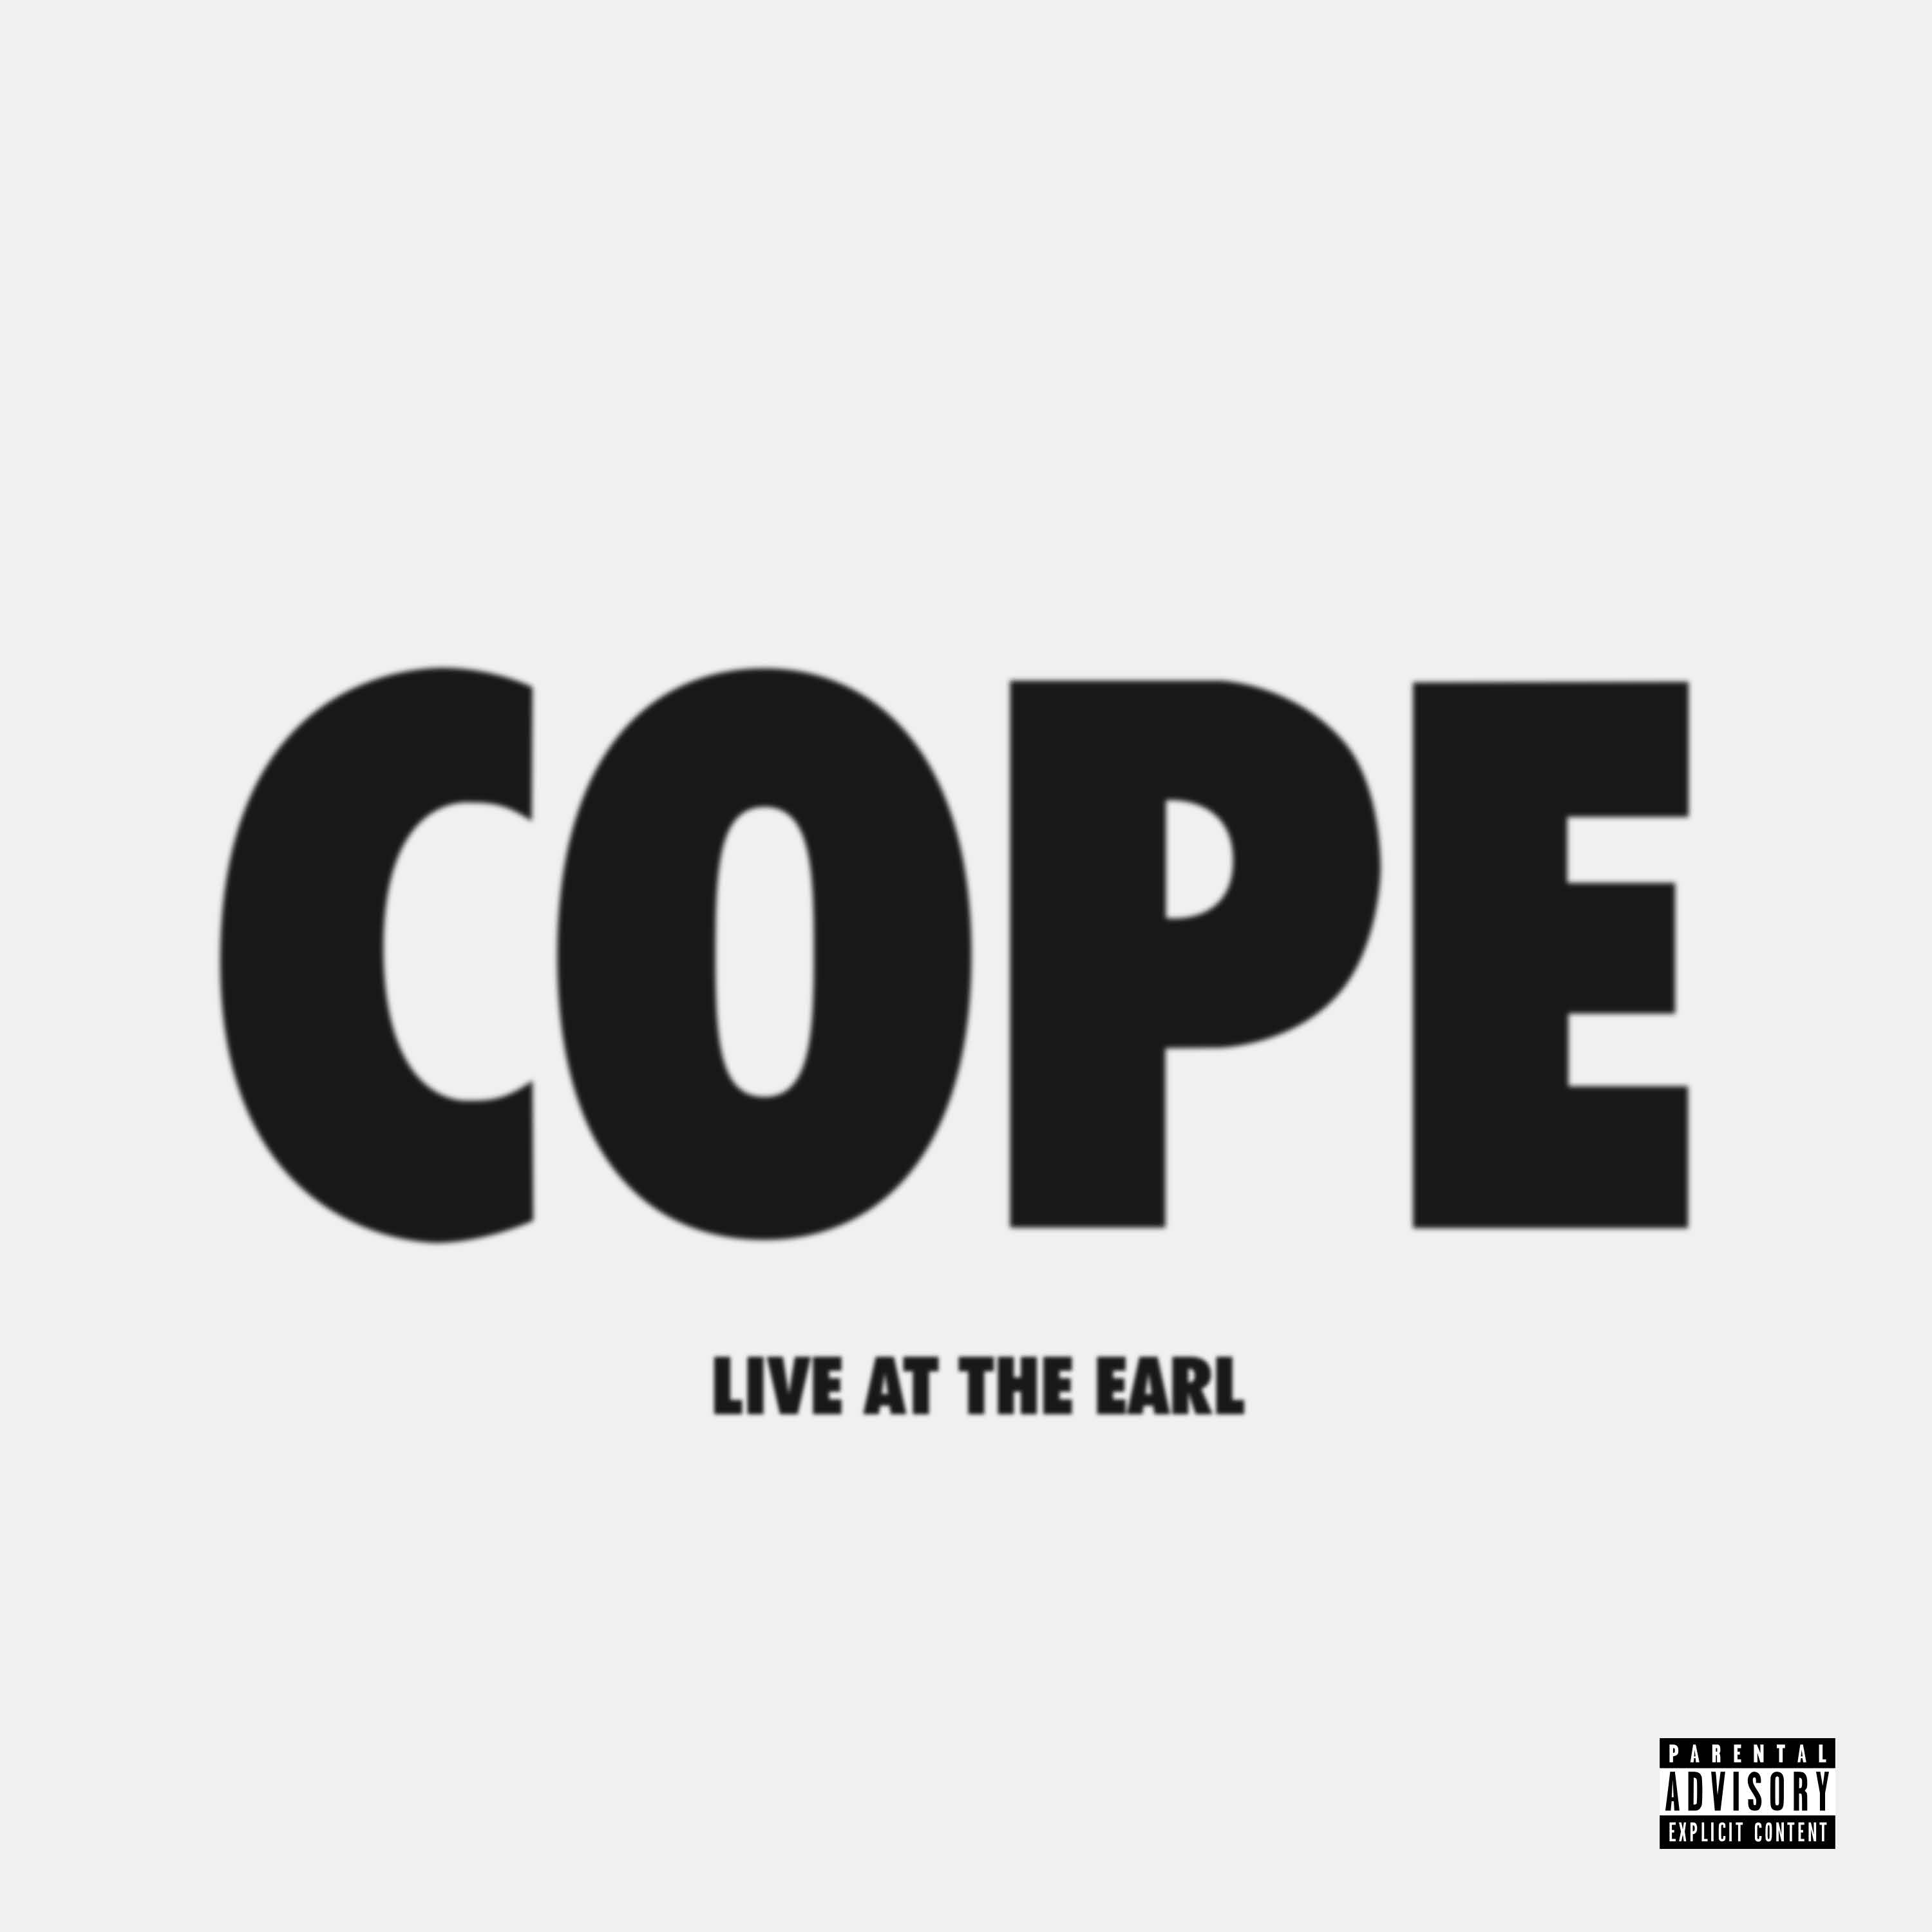 Manchester Orchestra - COPE - Live at The Earl: CD